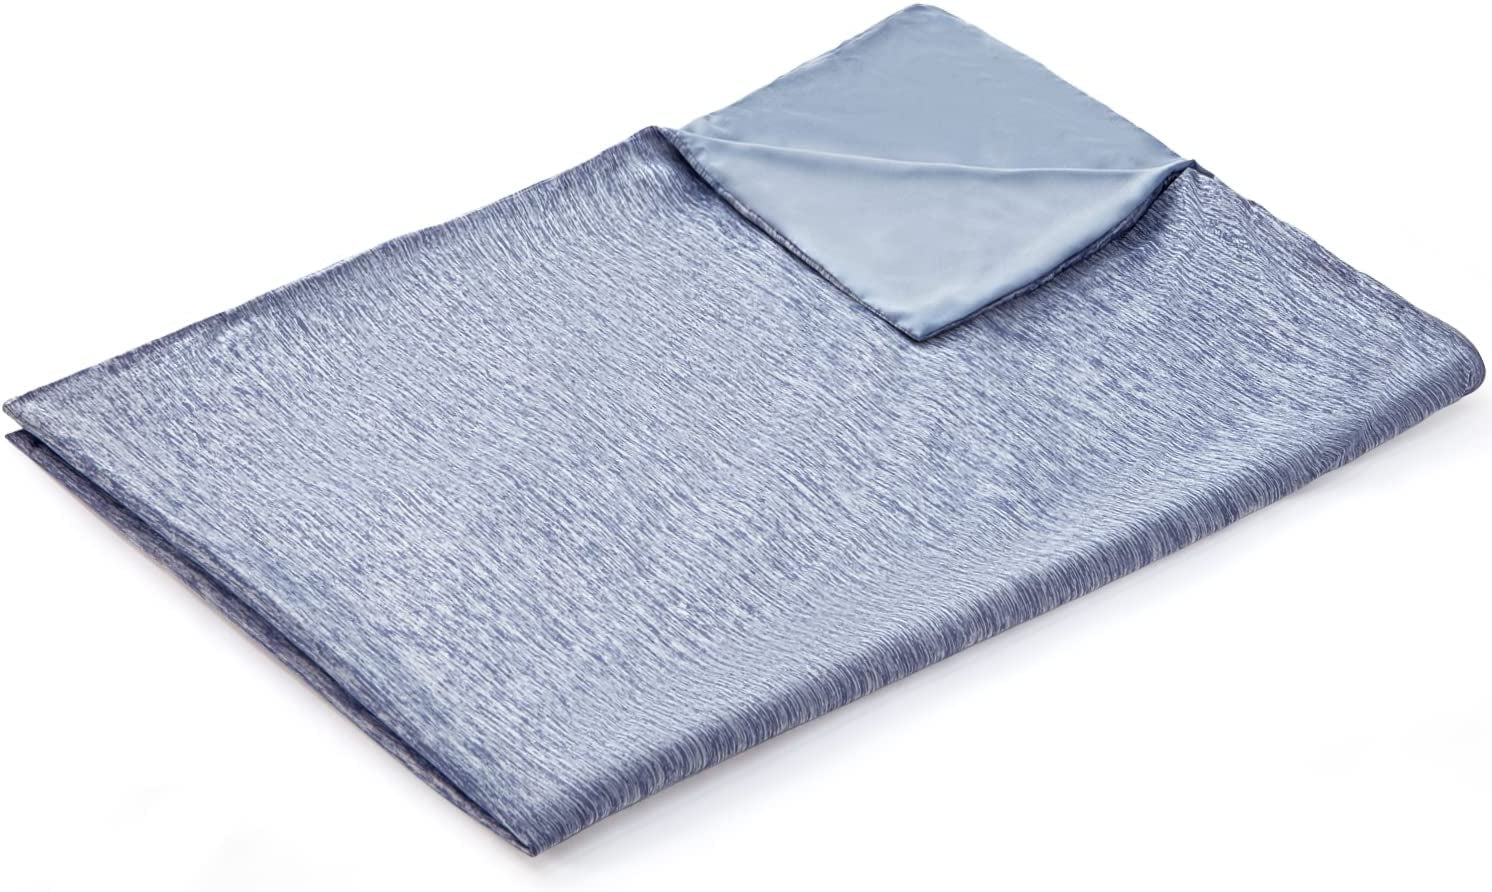  Cooling Blanket for Hot Sleepers 